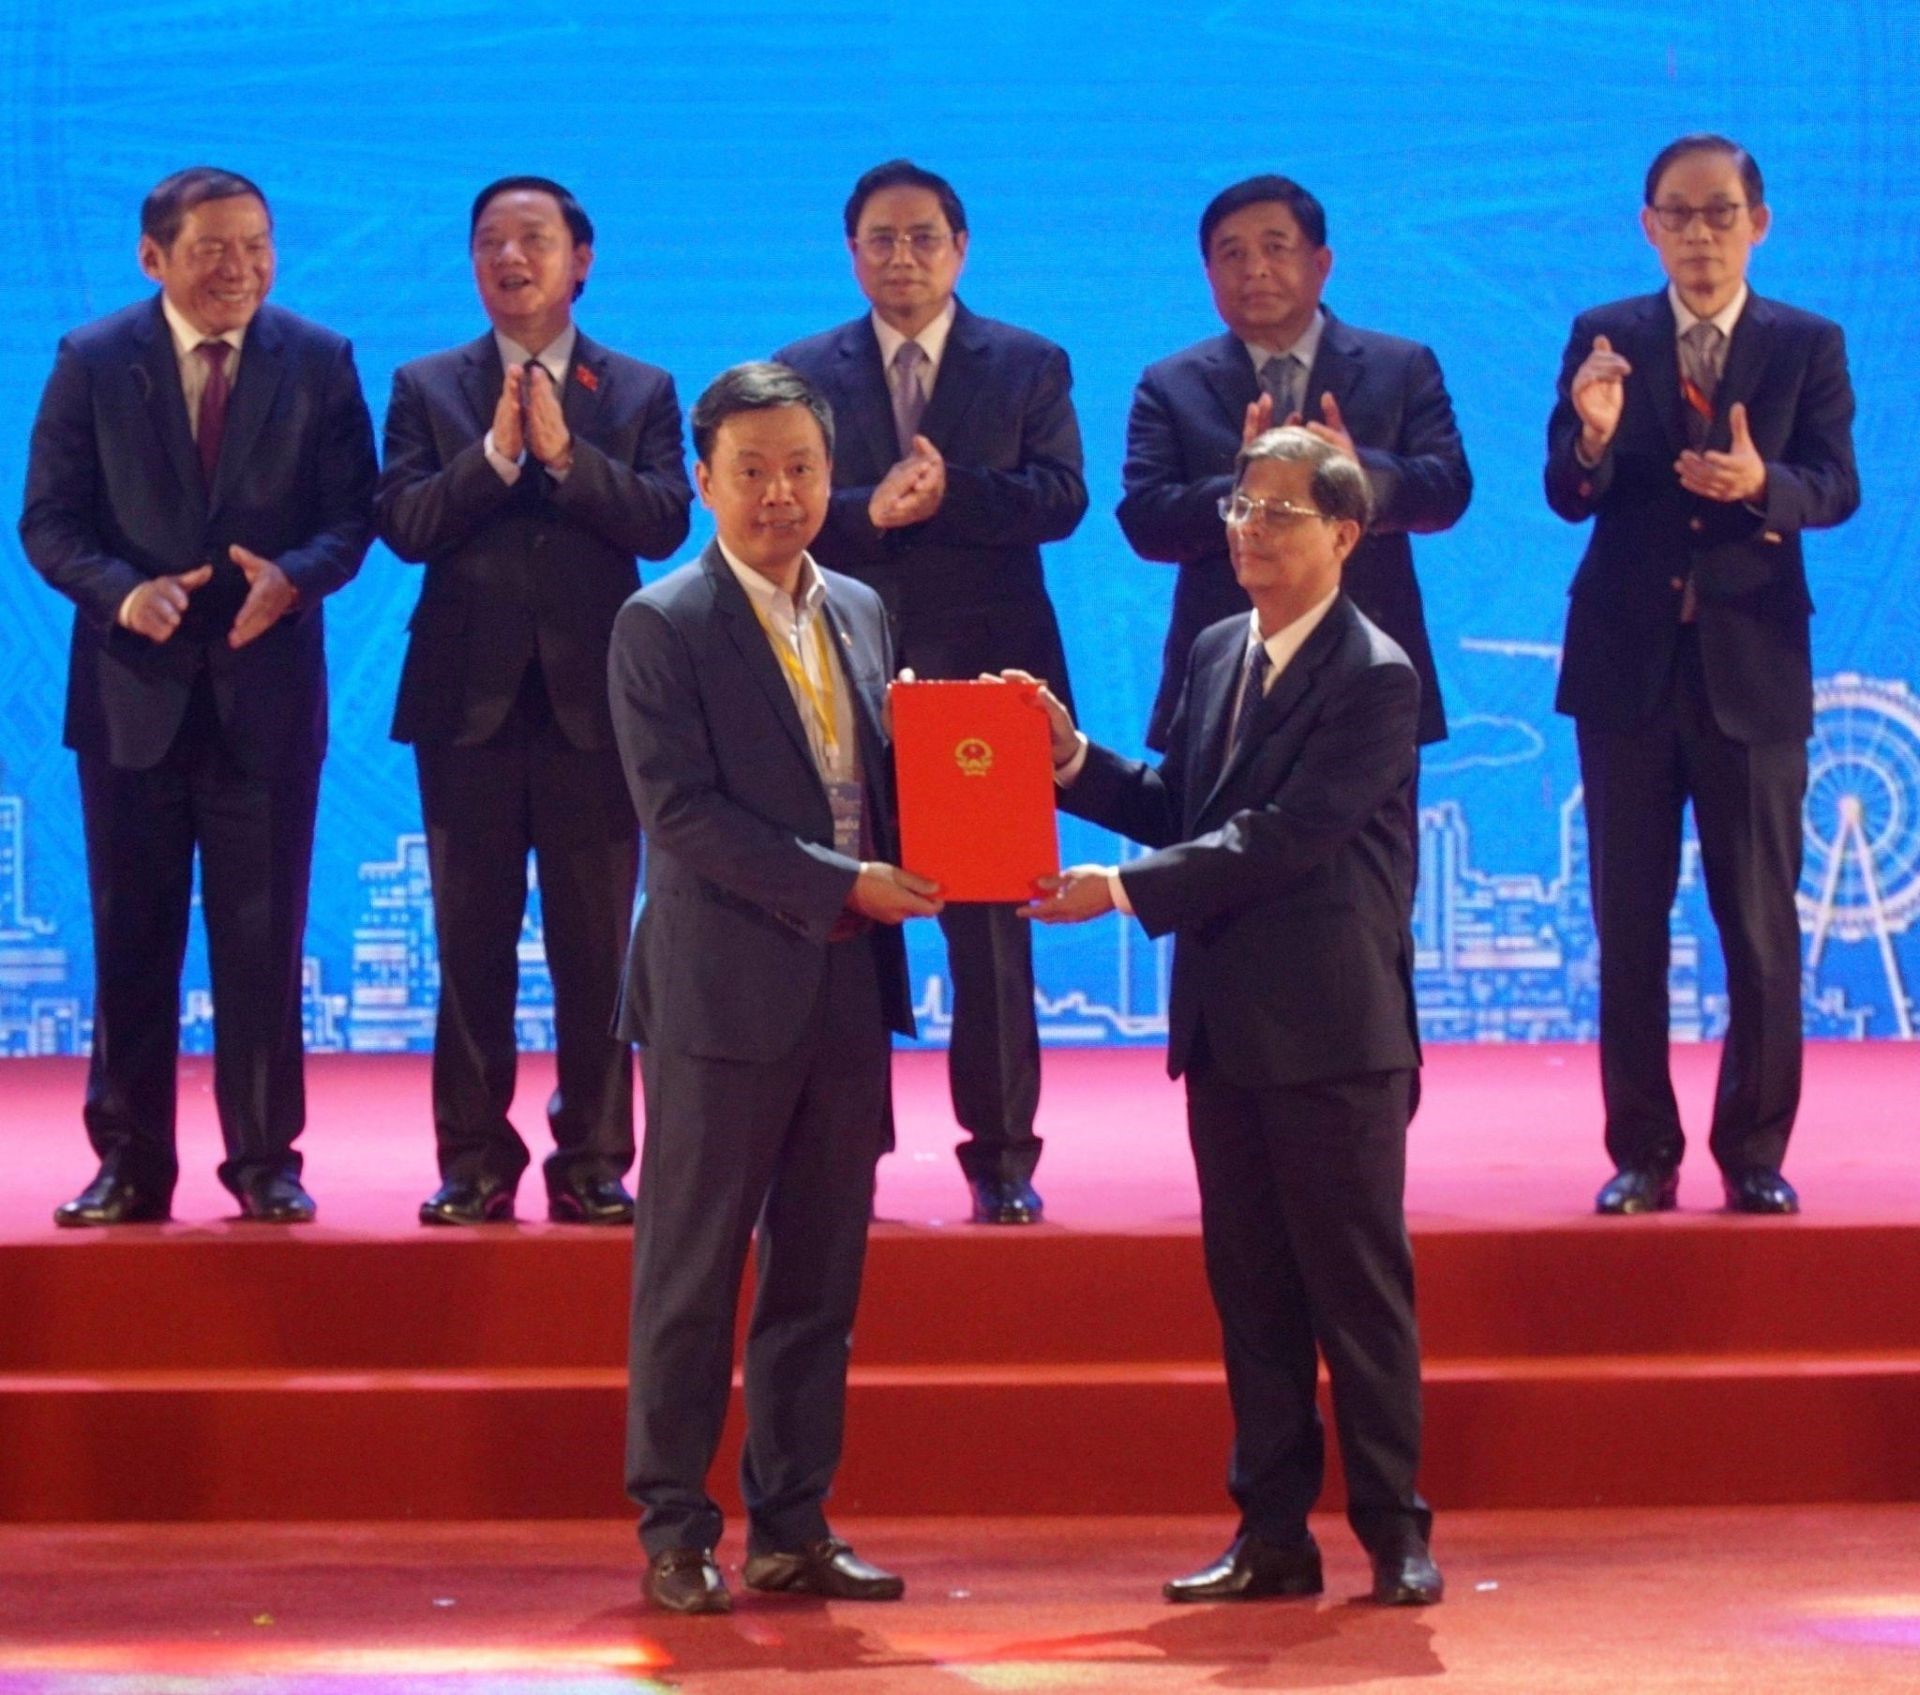 Mr. Nguyen Tan Tuan - Deputy Secretary of the Provincial Party Committee, Chairman of Khanh Hoa Provincial People's Committee (right) hands over the Memorandum of Understanding on Project Development in the field of Information Technology to Mr. Pham Minh Tuan - General Director of Software Company Limited FPT (FPT Software) - A member company of FPT Corporation.